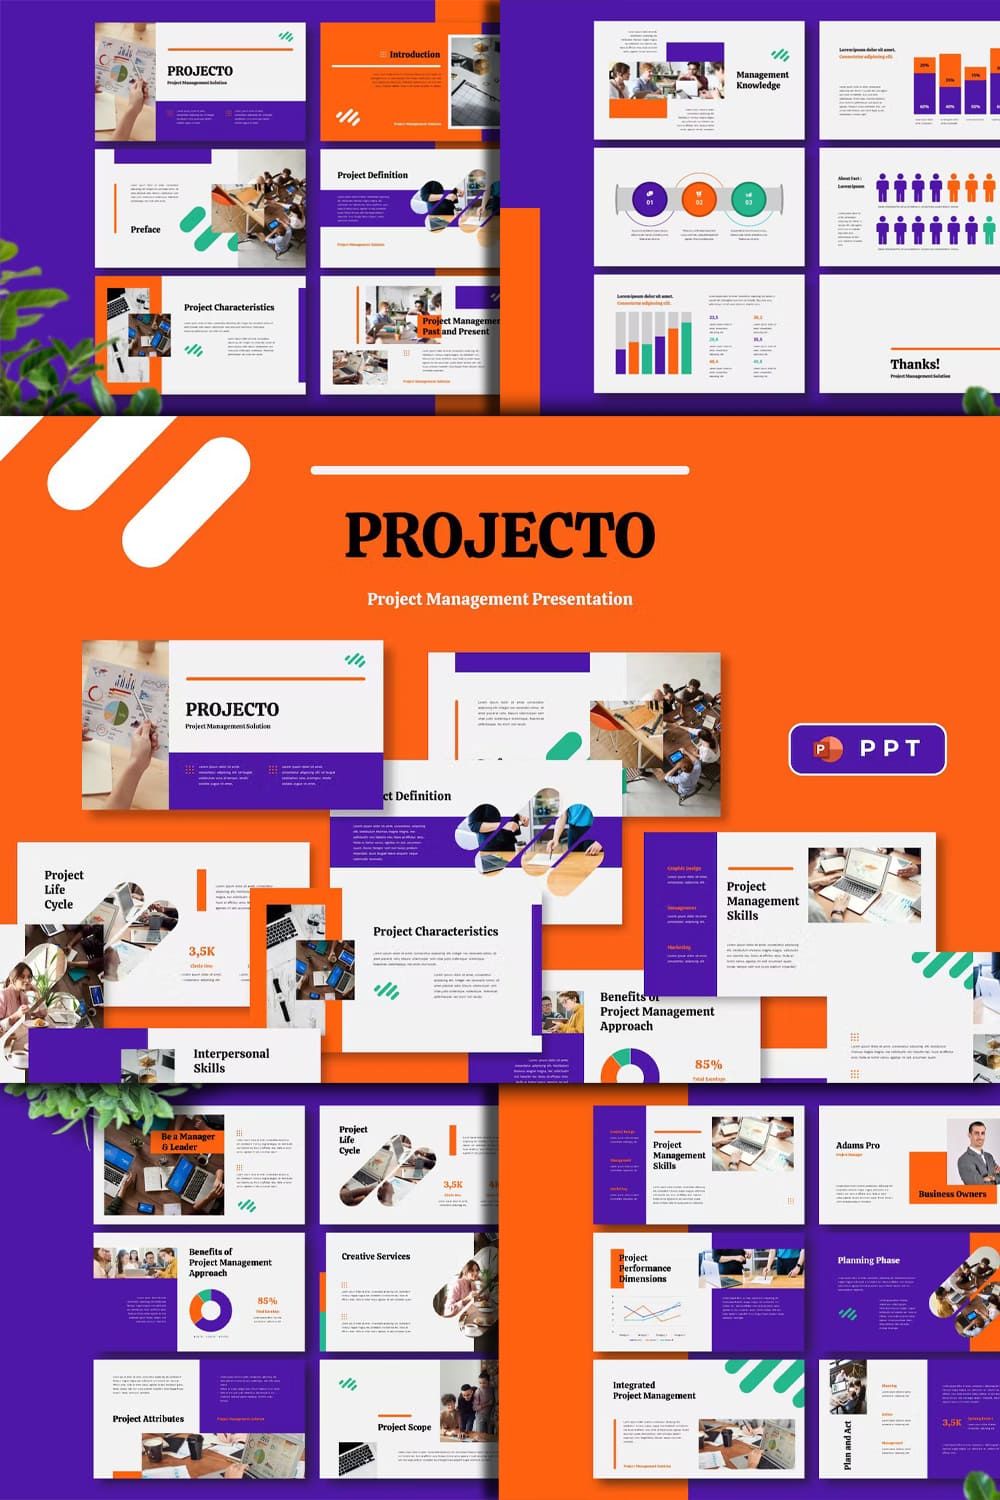 Projecto project management powerpoint template - pinterest image preview.